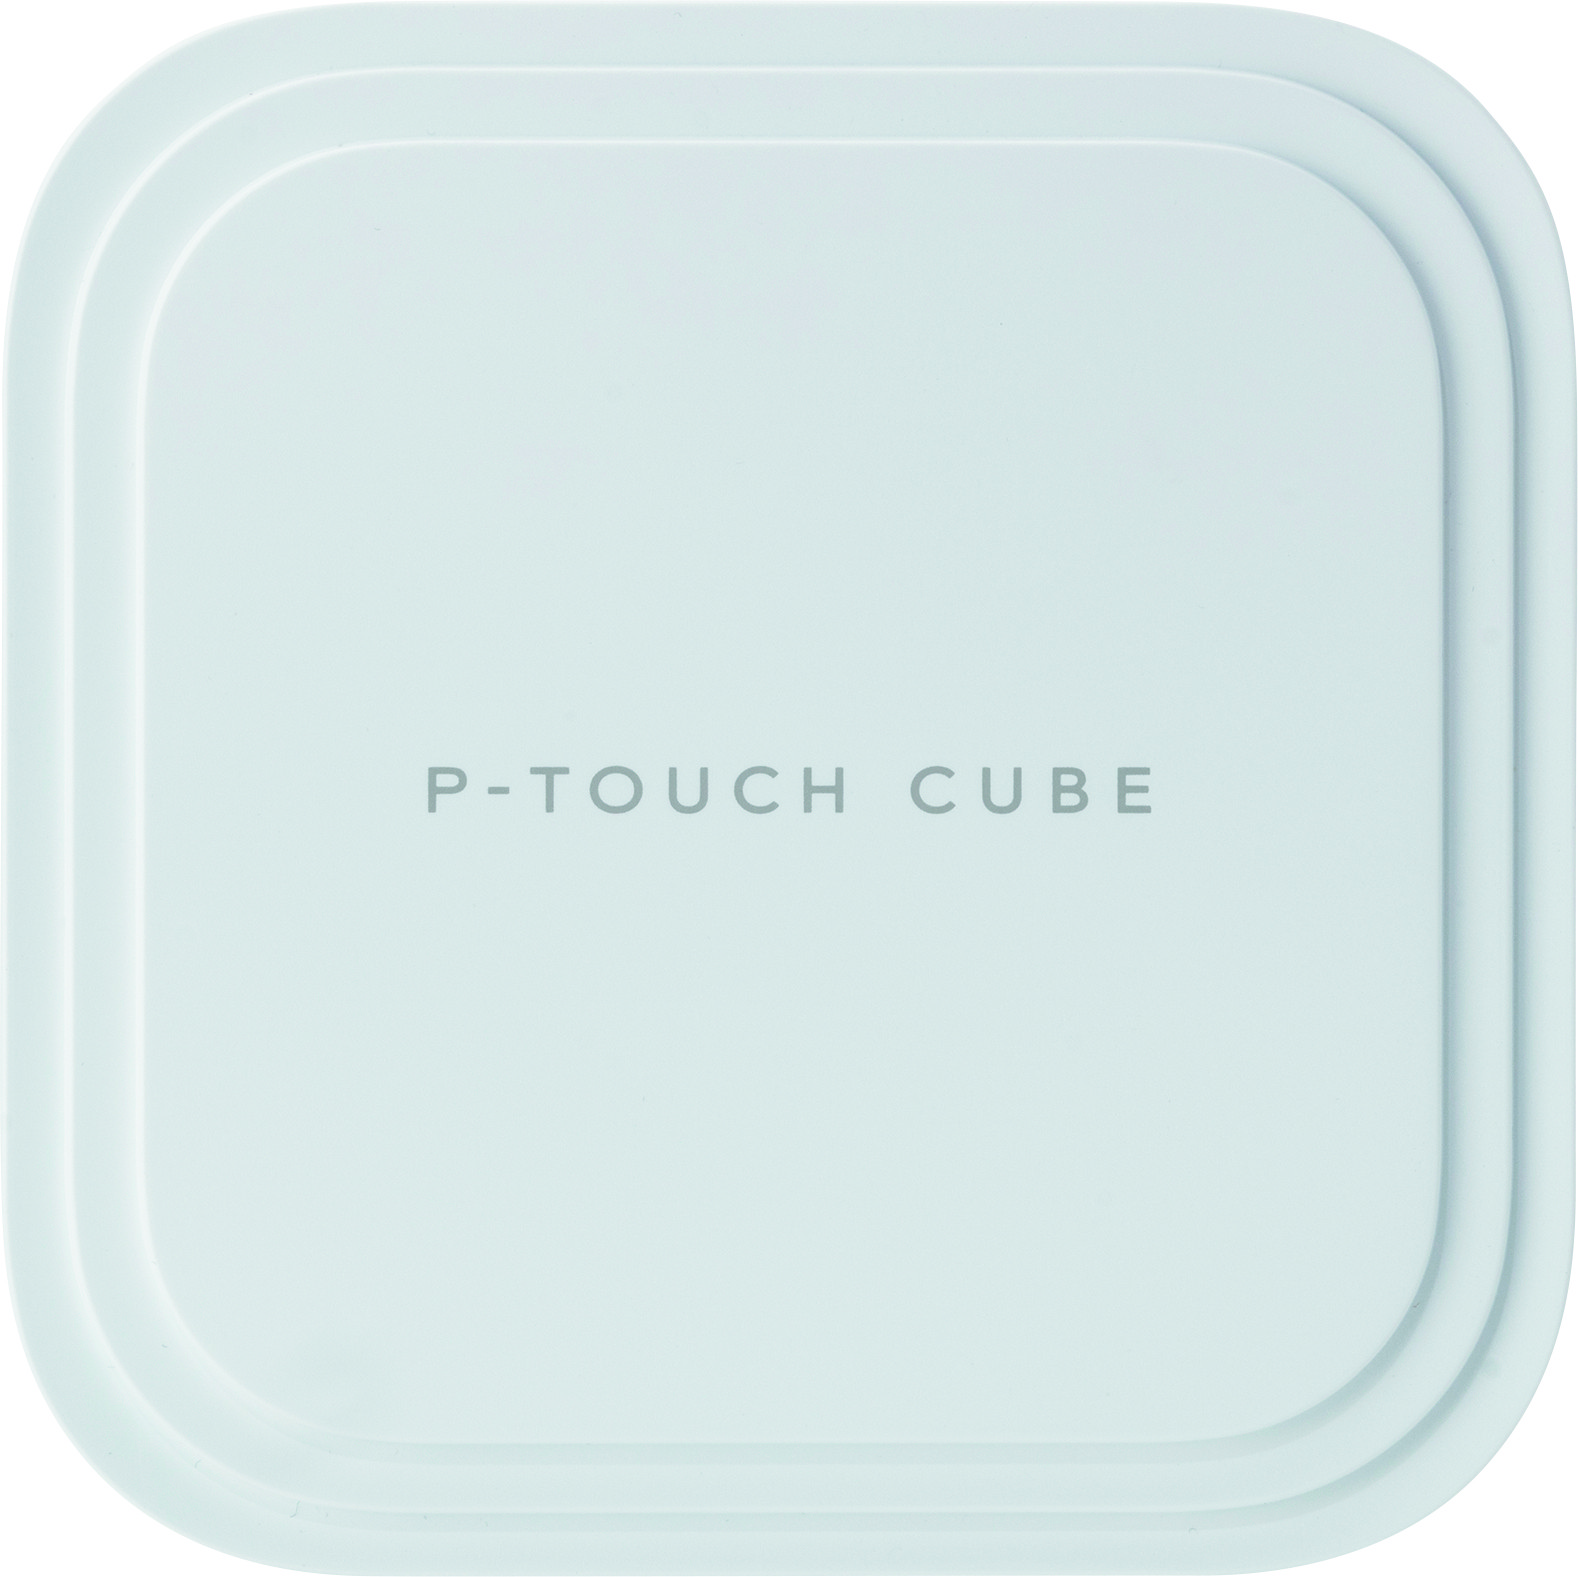 Brother-P-touch-CUBE-Pro-Professionelles-Beschriftungsgerat